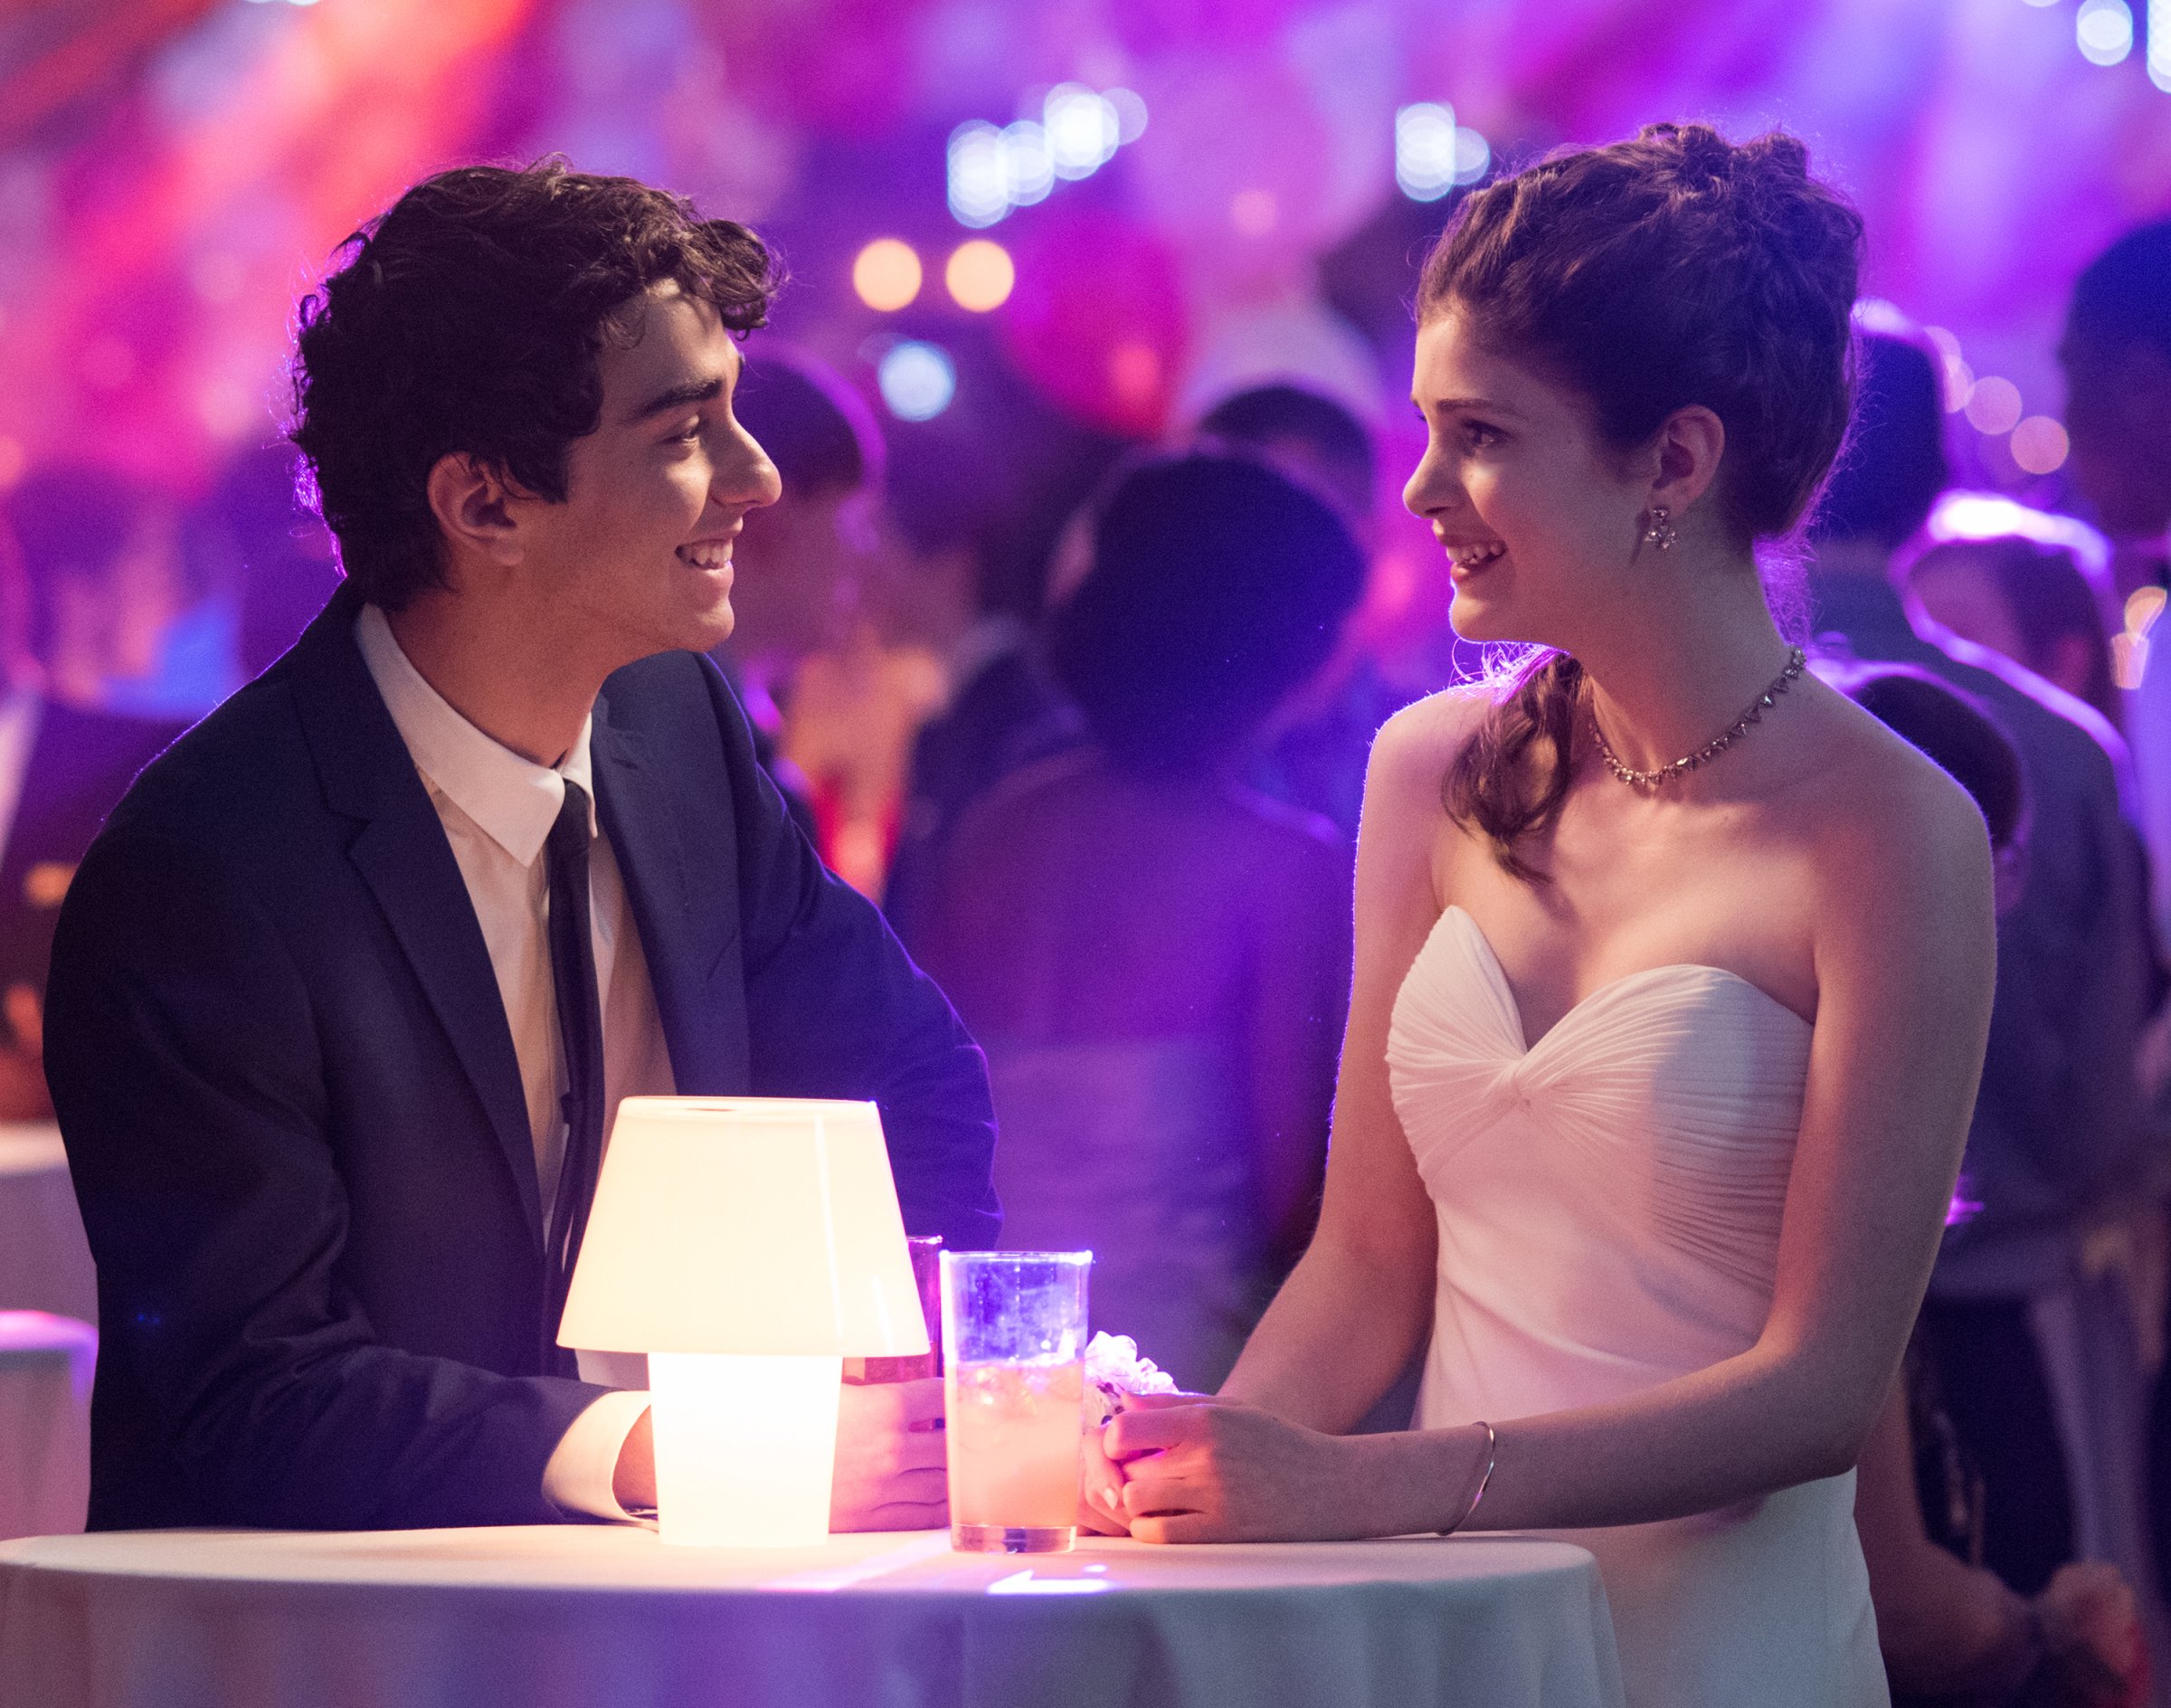 Alex Wolff, left, and Elena Kampouris, right, in a scene from My Big Fat Greek Wedding 2.